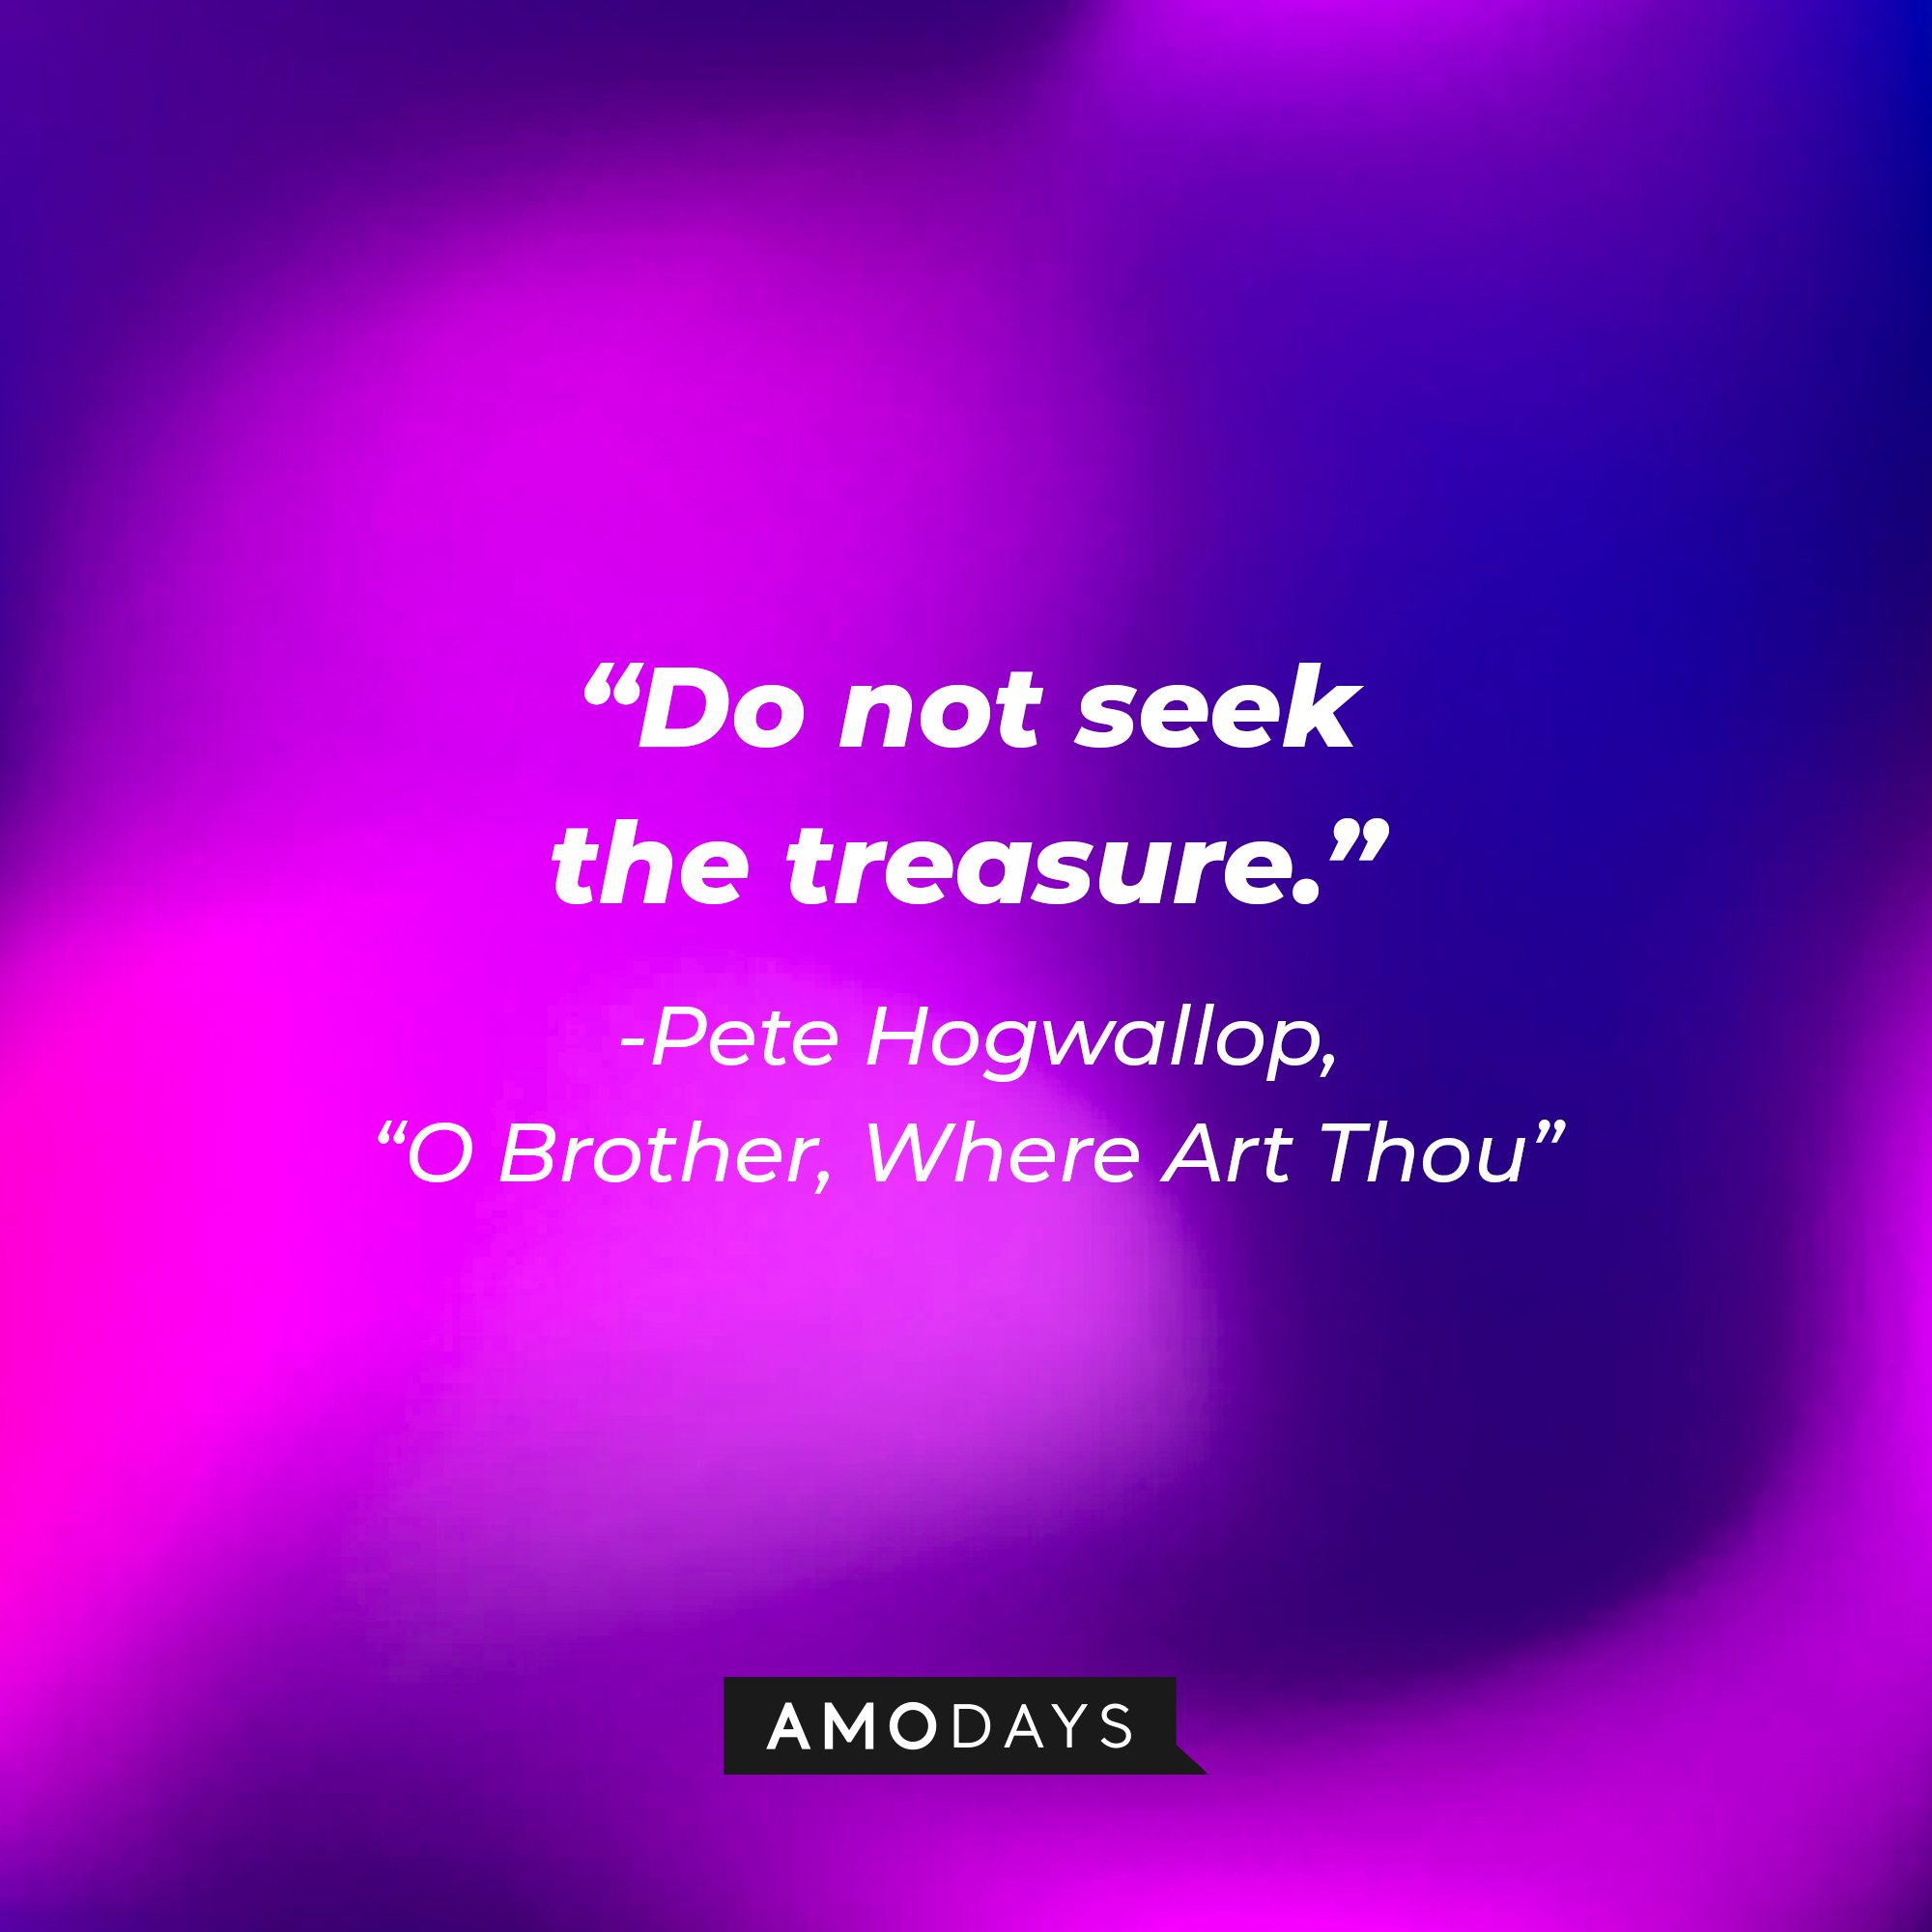 Pete Hogwallop's quote in "O Brother, Where Art Thou:" "Do not seek the treasure." | Source: AmoDays